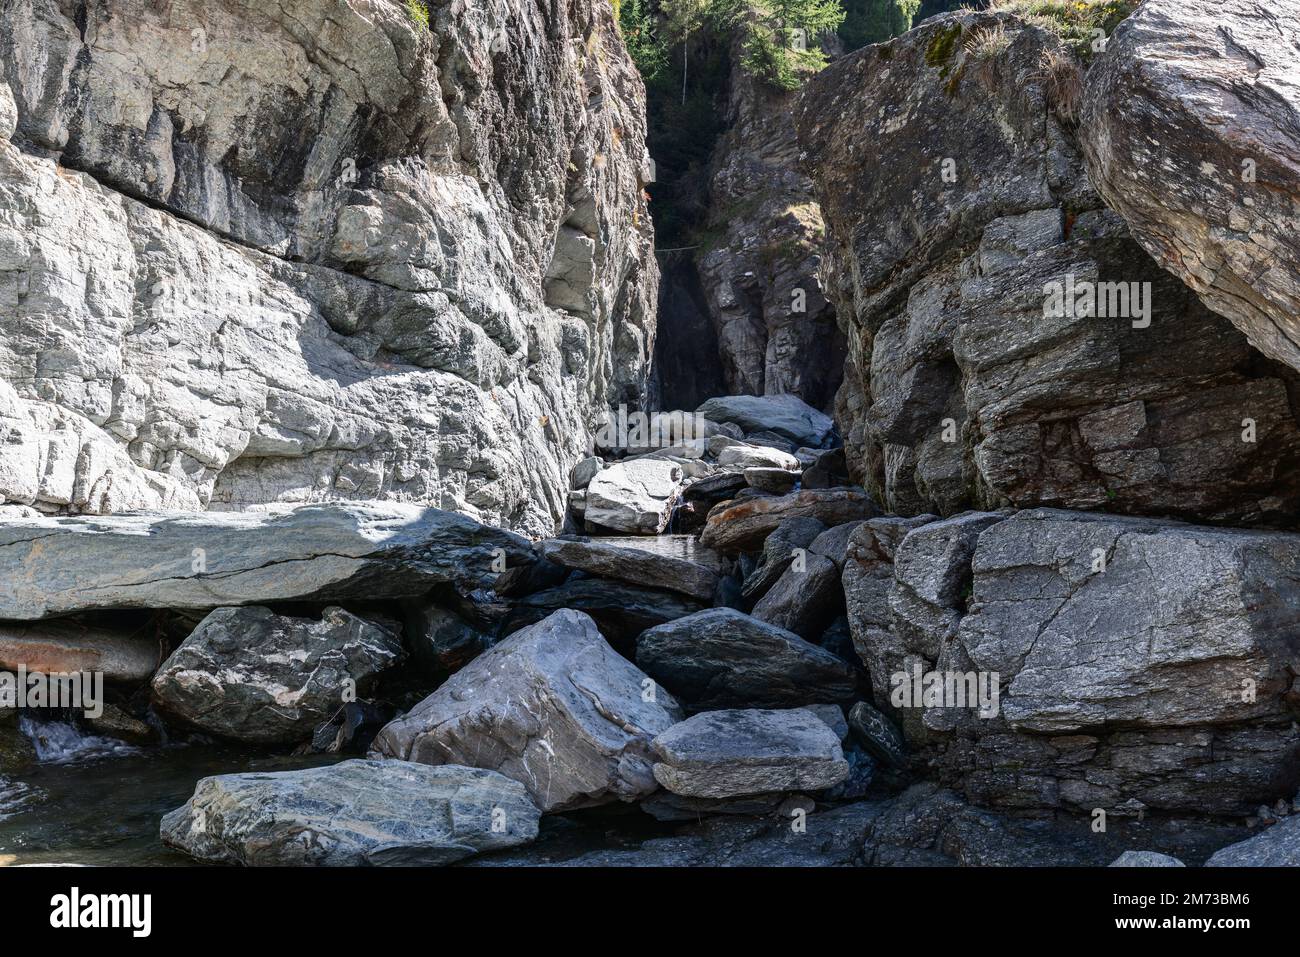 Lillaz waterfall (Cascate di Lillaz) bed, dried up this season, divided by thousands of years of formation in granite alpine rocks, Aosta valley Stock Photo